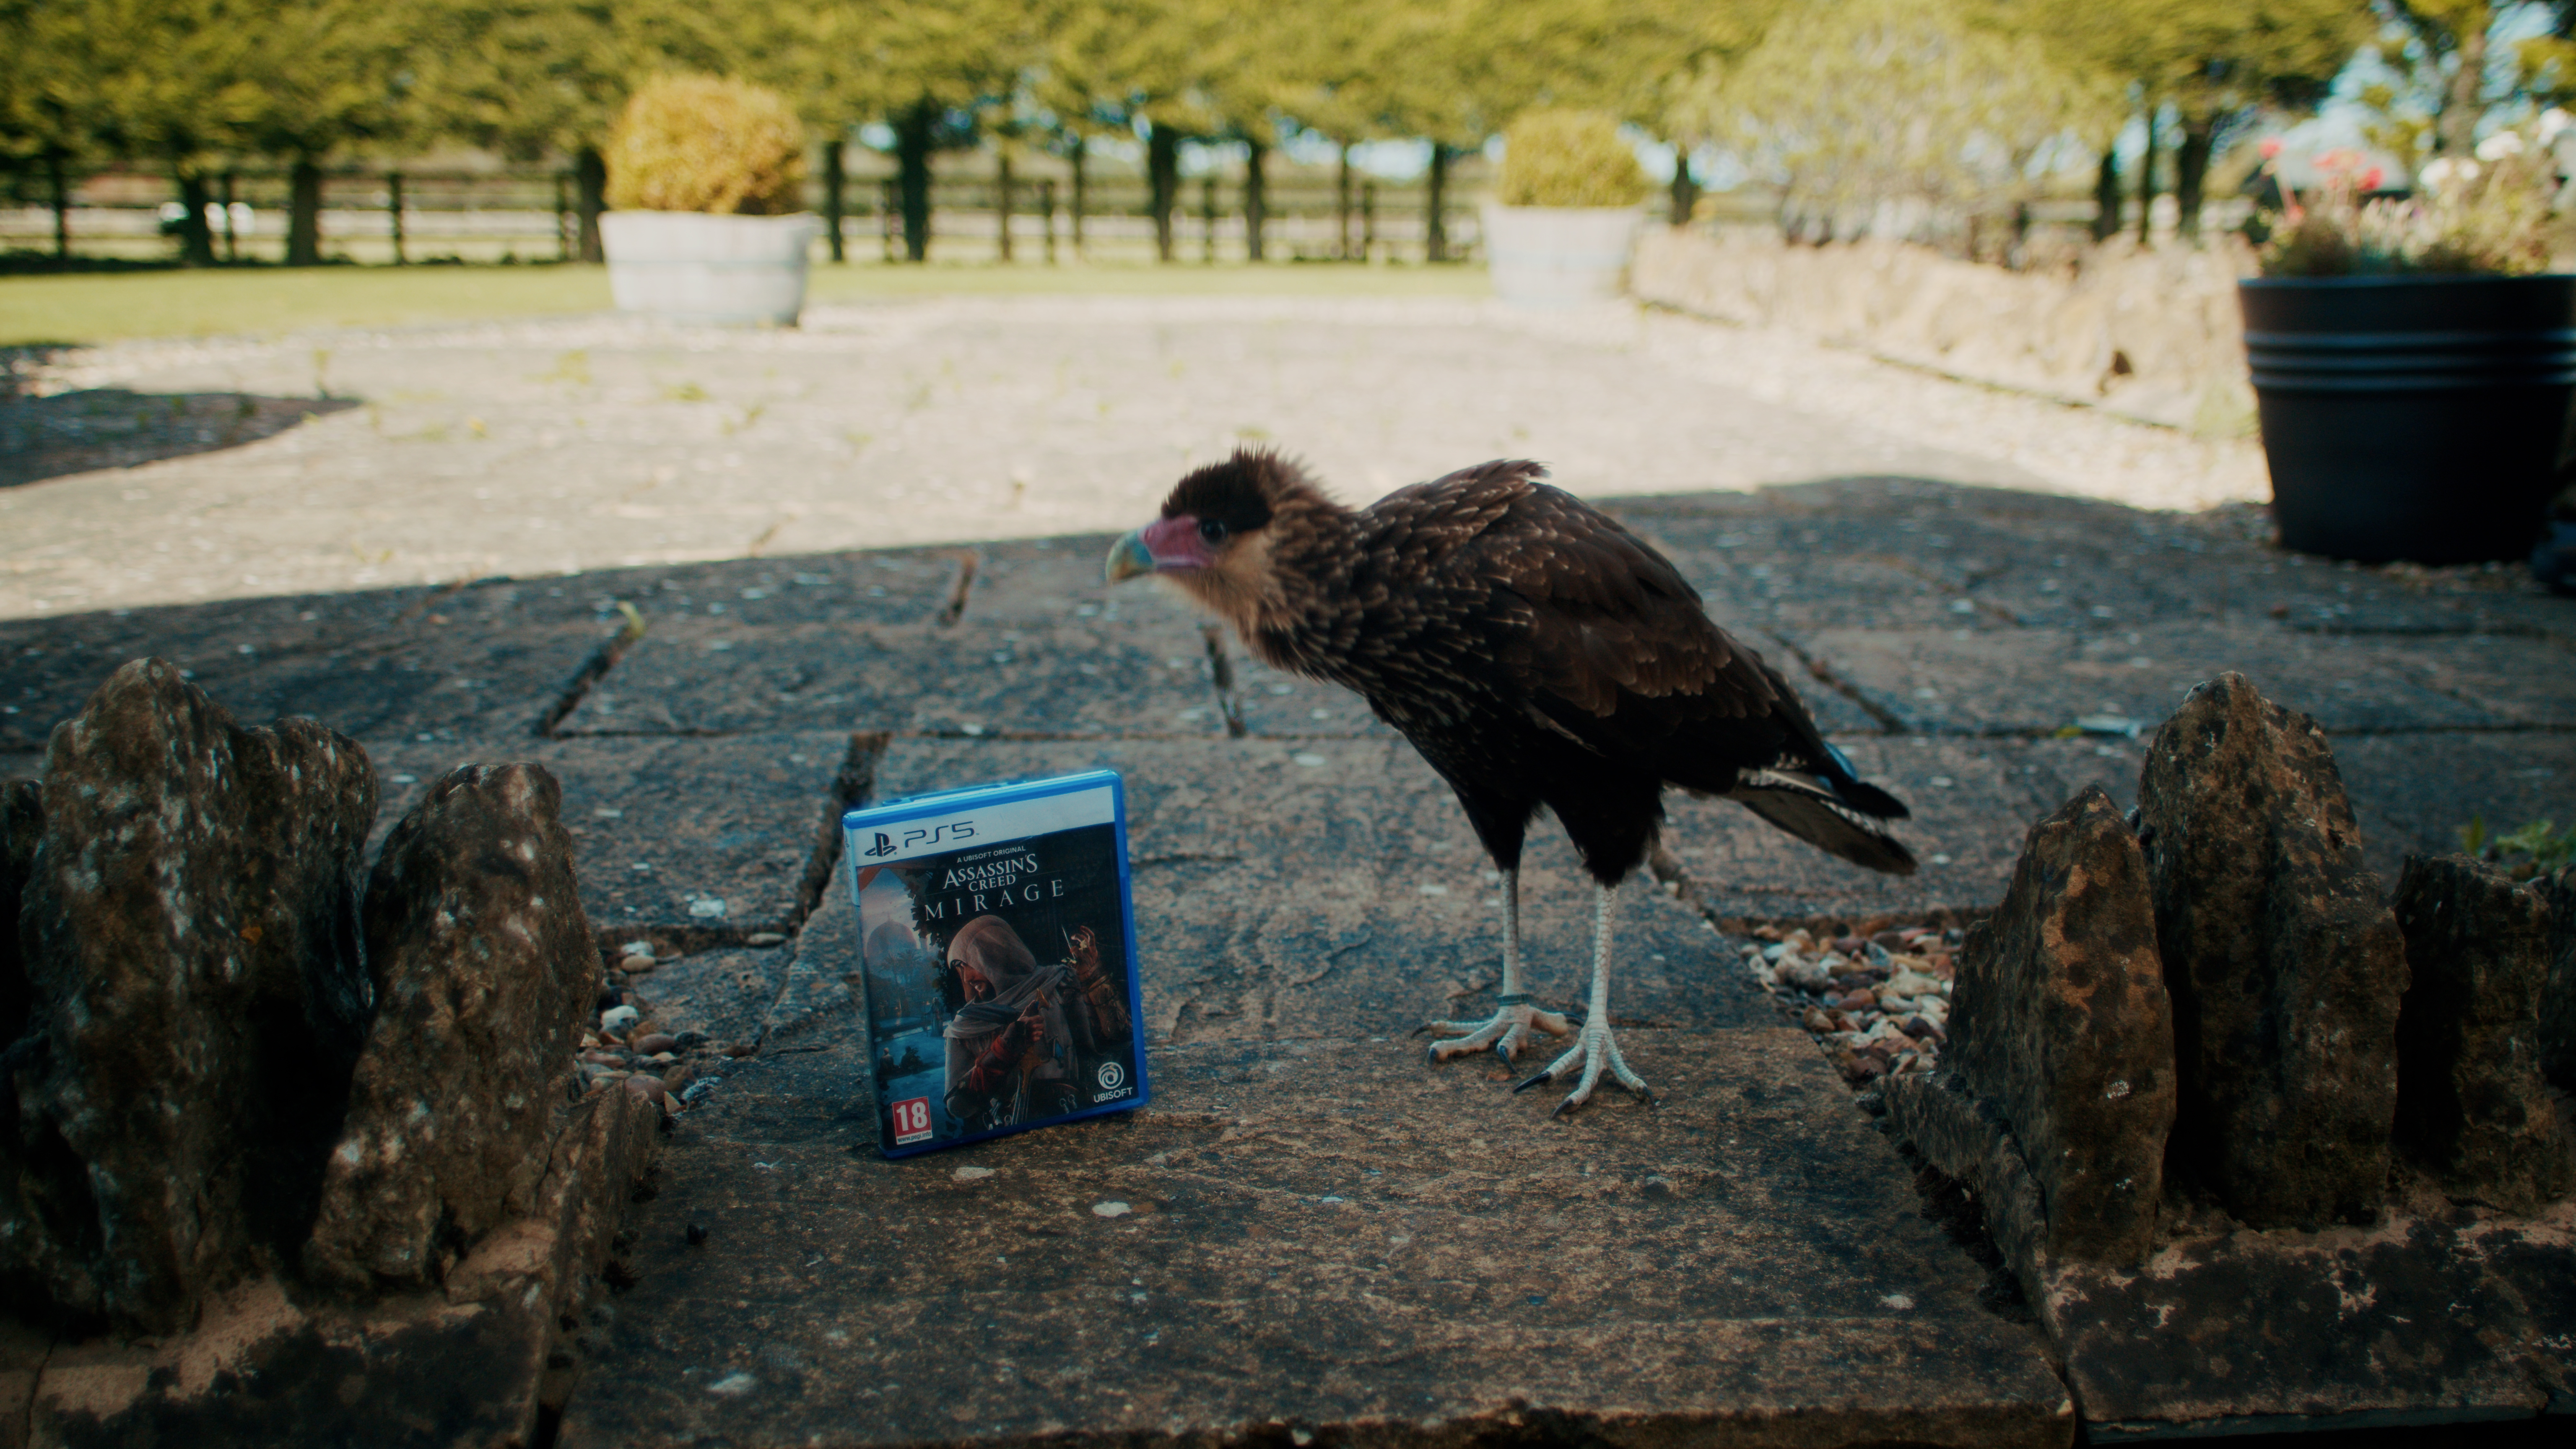 A man with a bird holding a copy of Assassin's Creed.